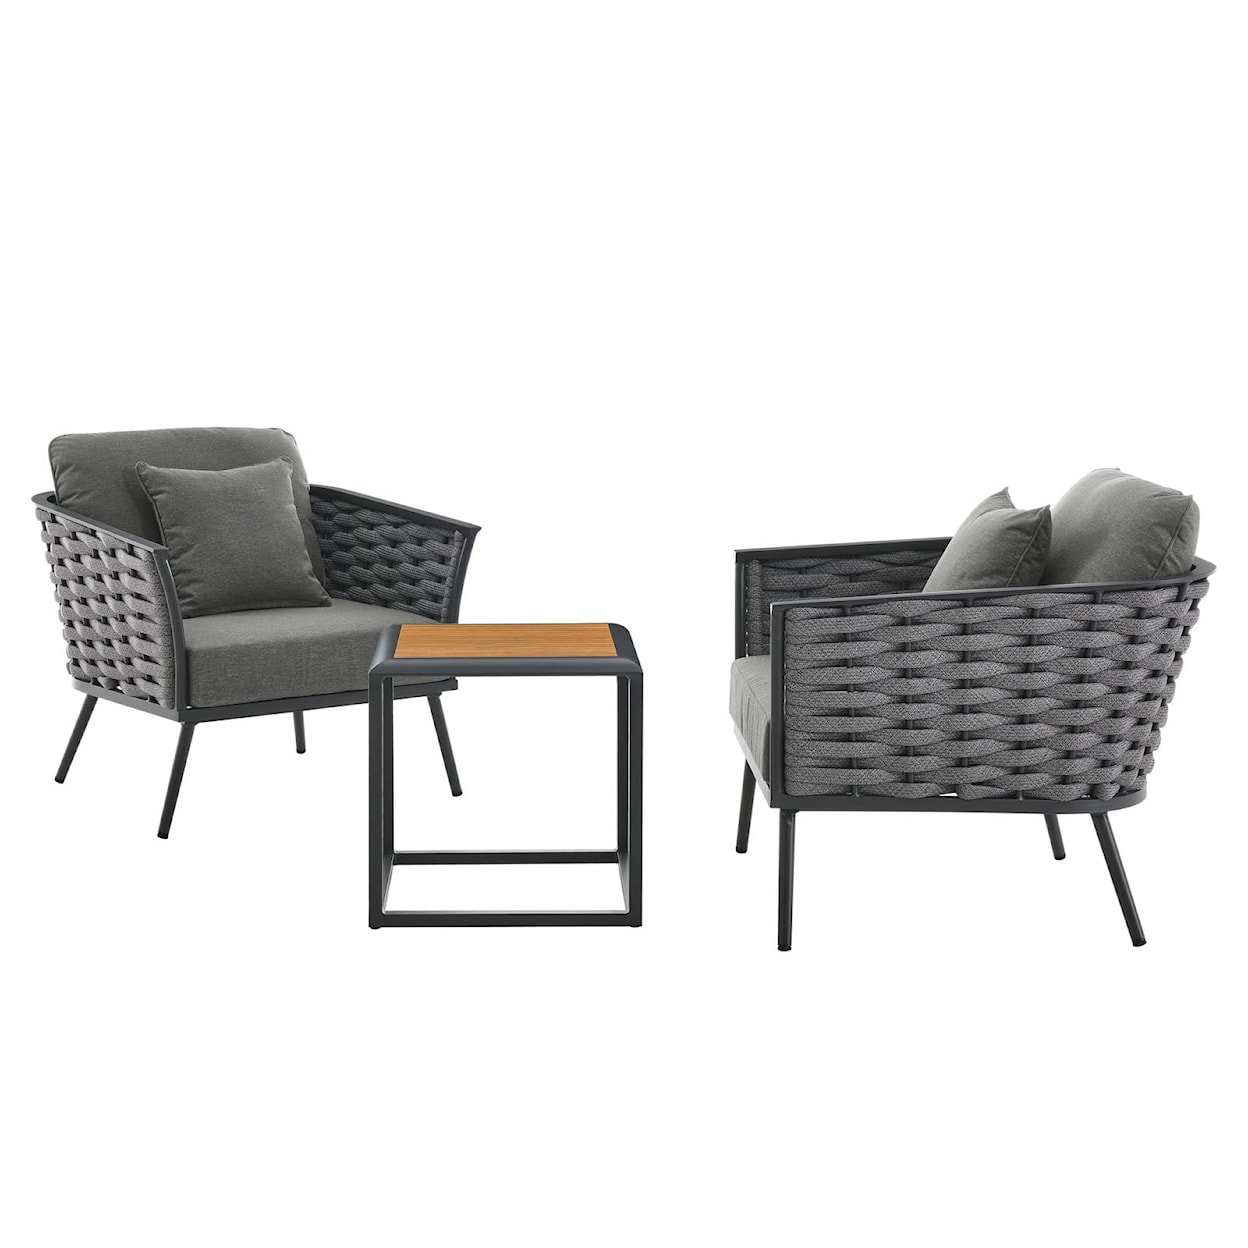 Modway Stance Stance 3 Piece Outdoor Sofa Set